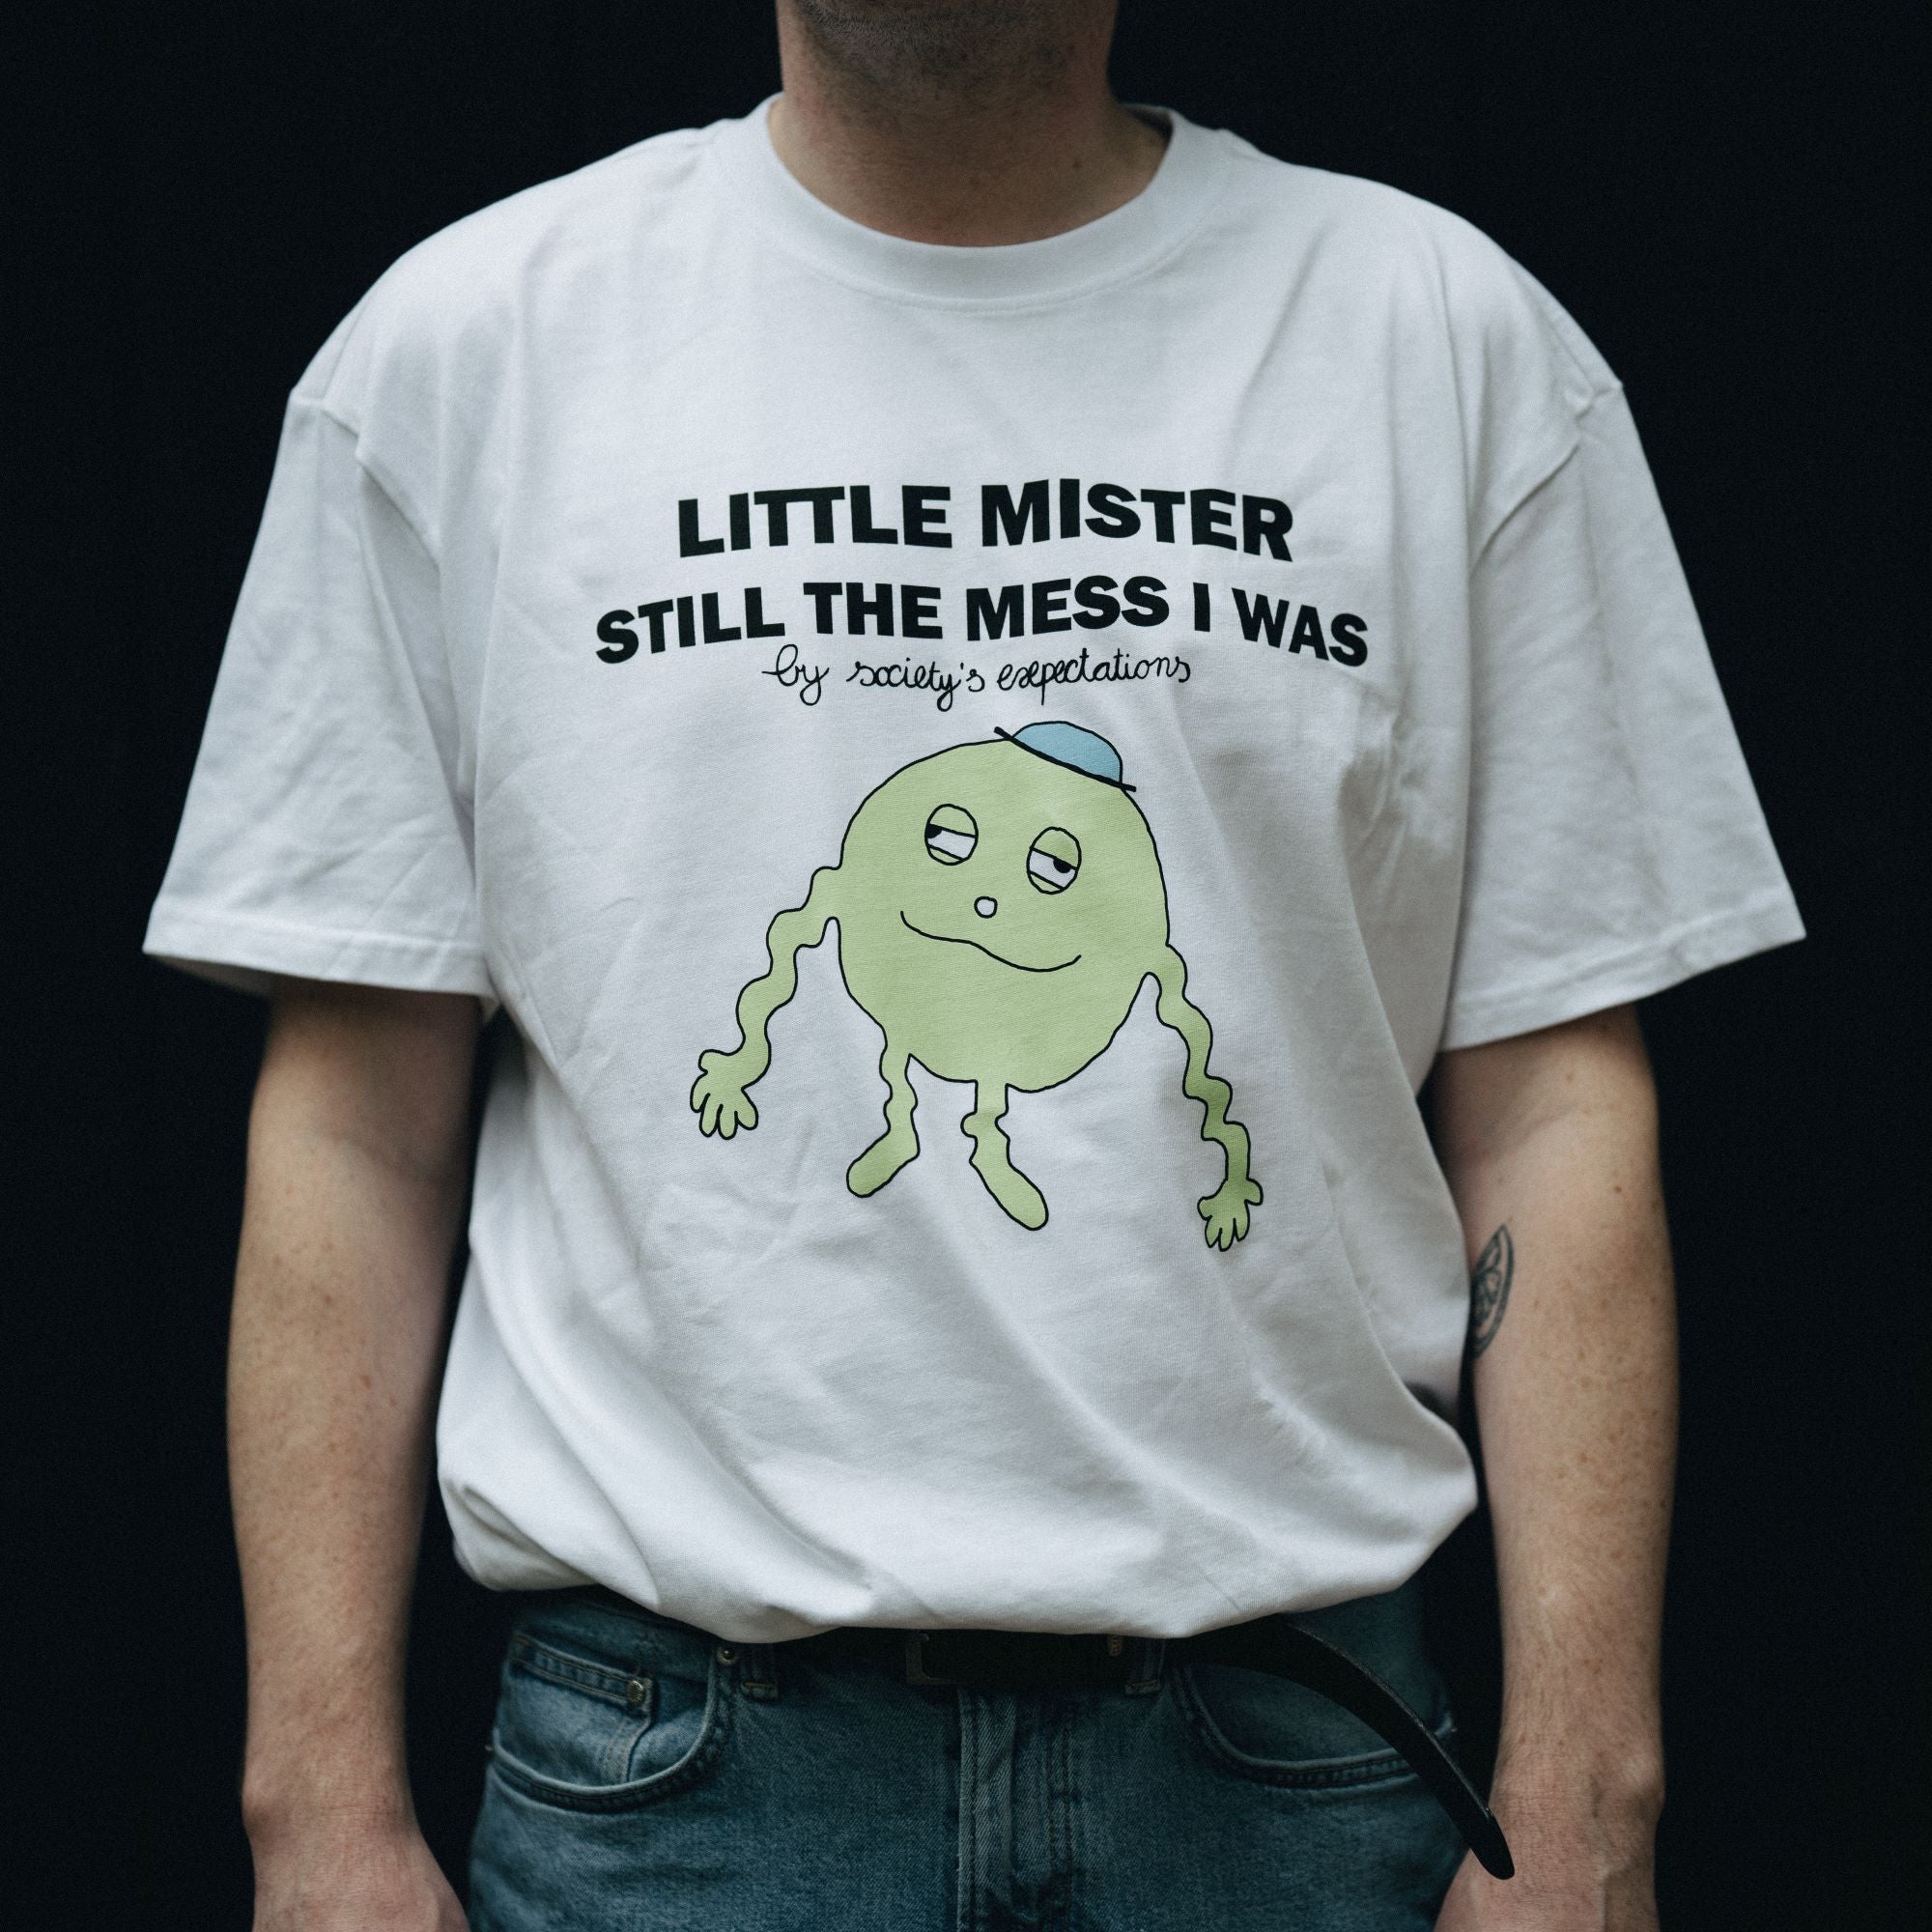 Roofman - Mister Mess (White) T-Shirt